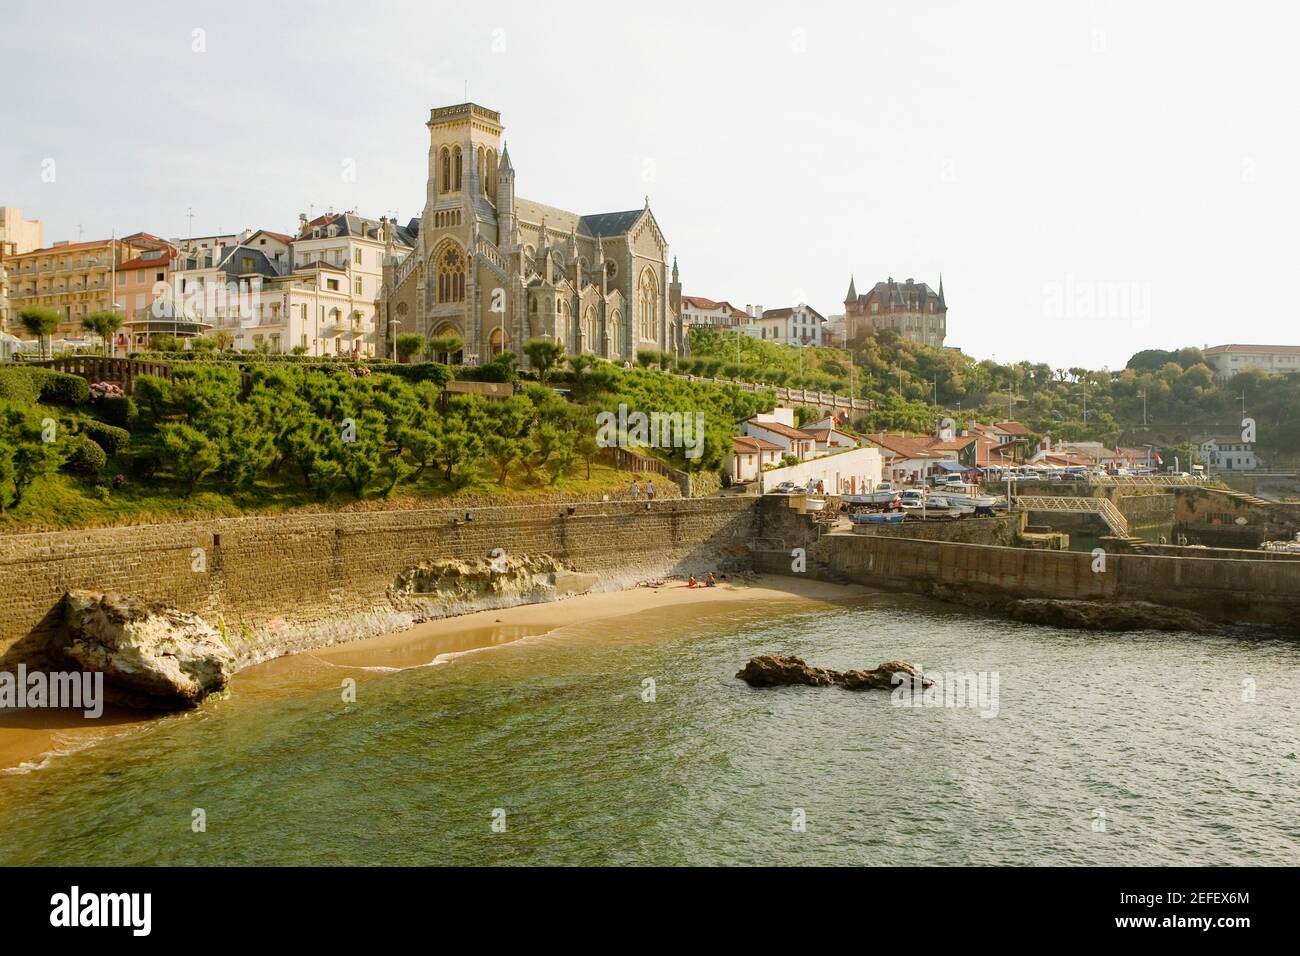 Cathedral in a city, Port des Pecheurs, Eglise Sainte Eugenie, Biarritz, France Stock Photo